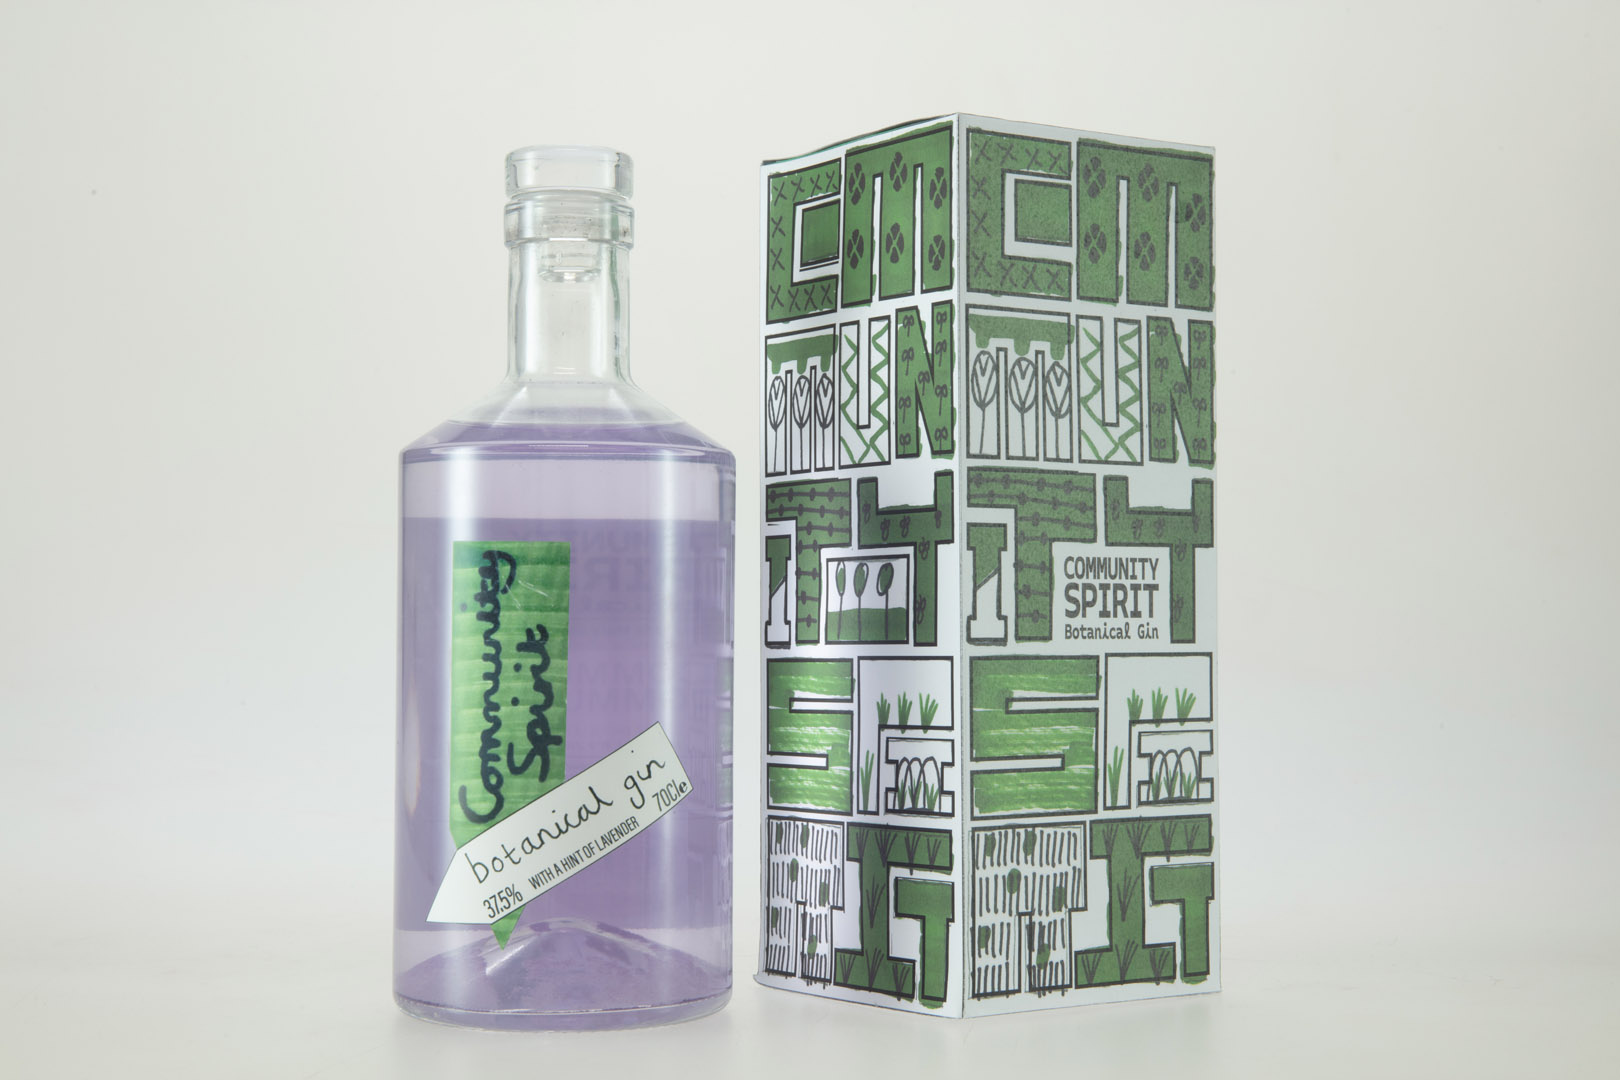 Photograph of Bottle and Box Design for Community Spirit Gin by Dan De'ath. Bottle has green label with purple liquid in, box has green design with large boxy text.